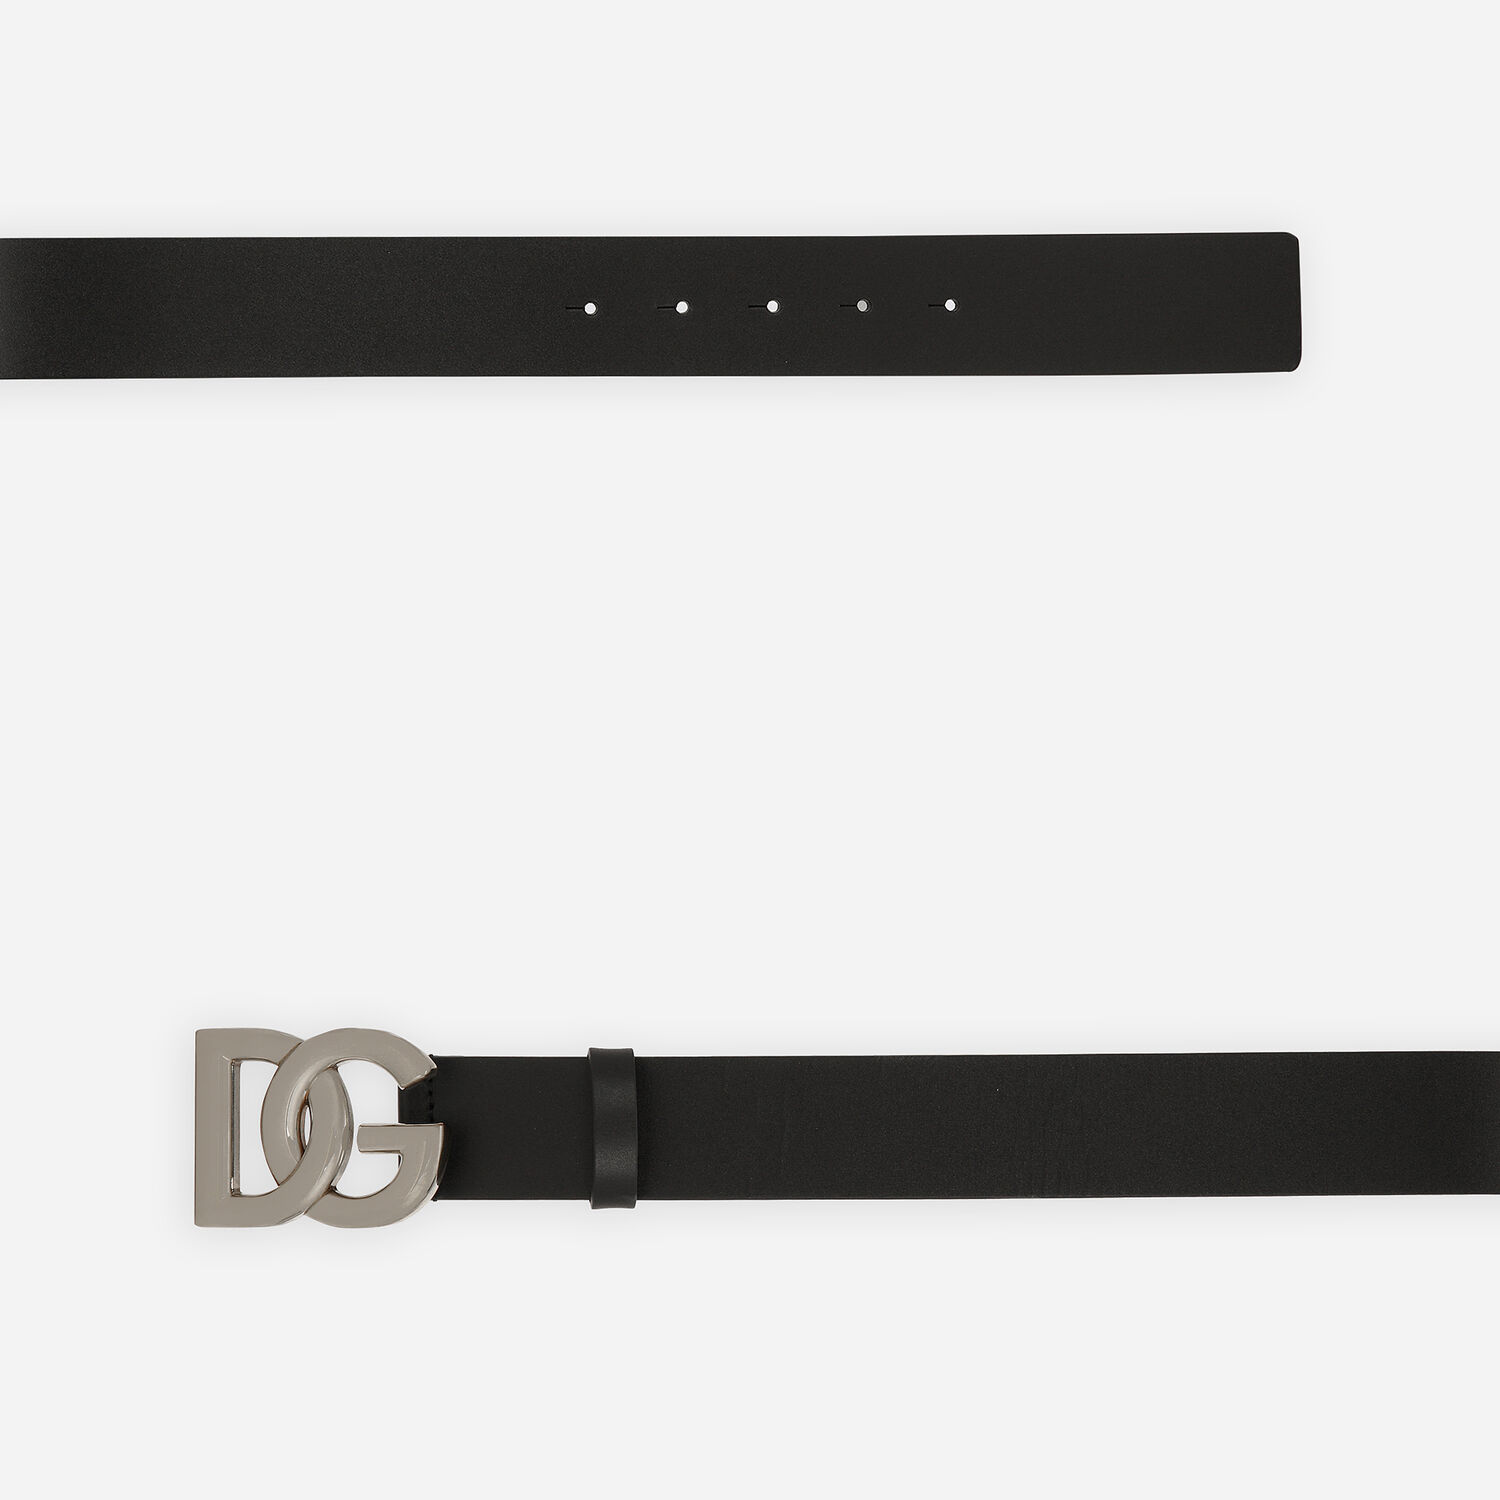 Lux leather belt with crossover DG logo buckle in Black for |  Dolce&Gabbana® US